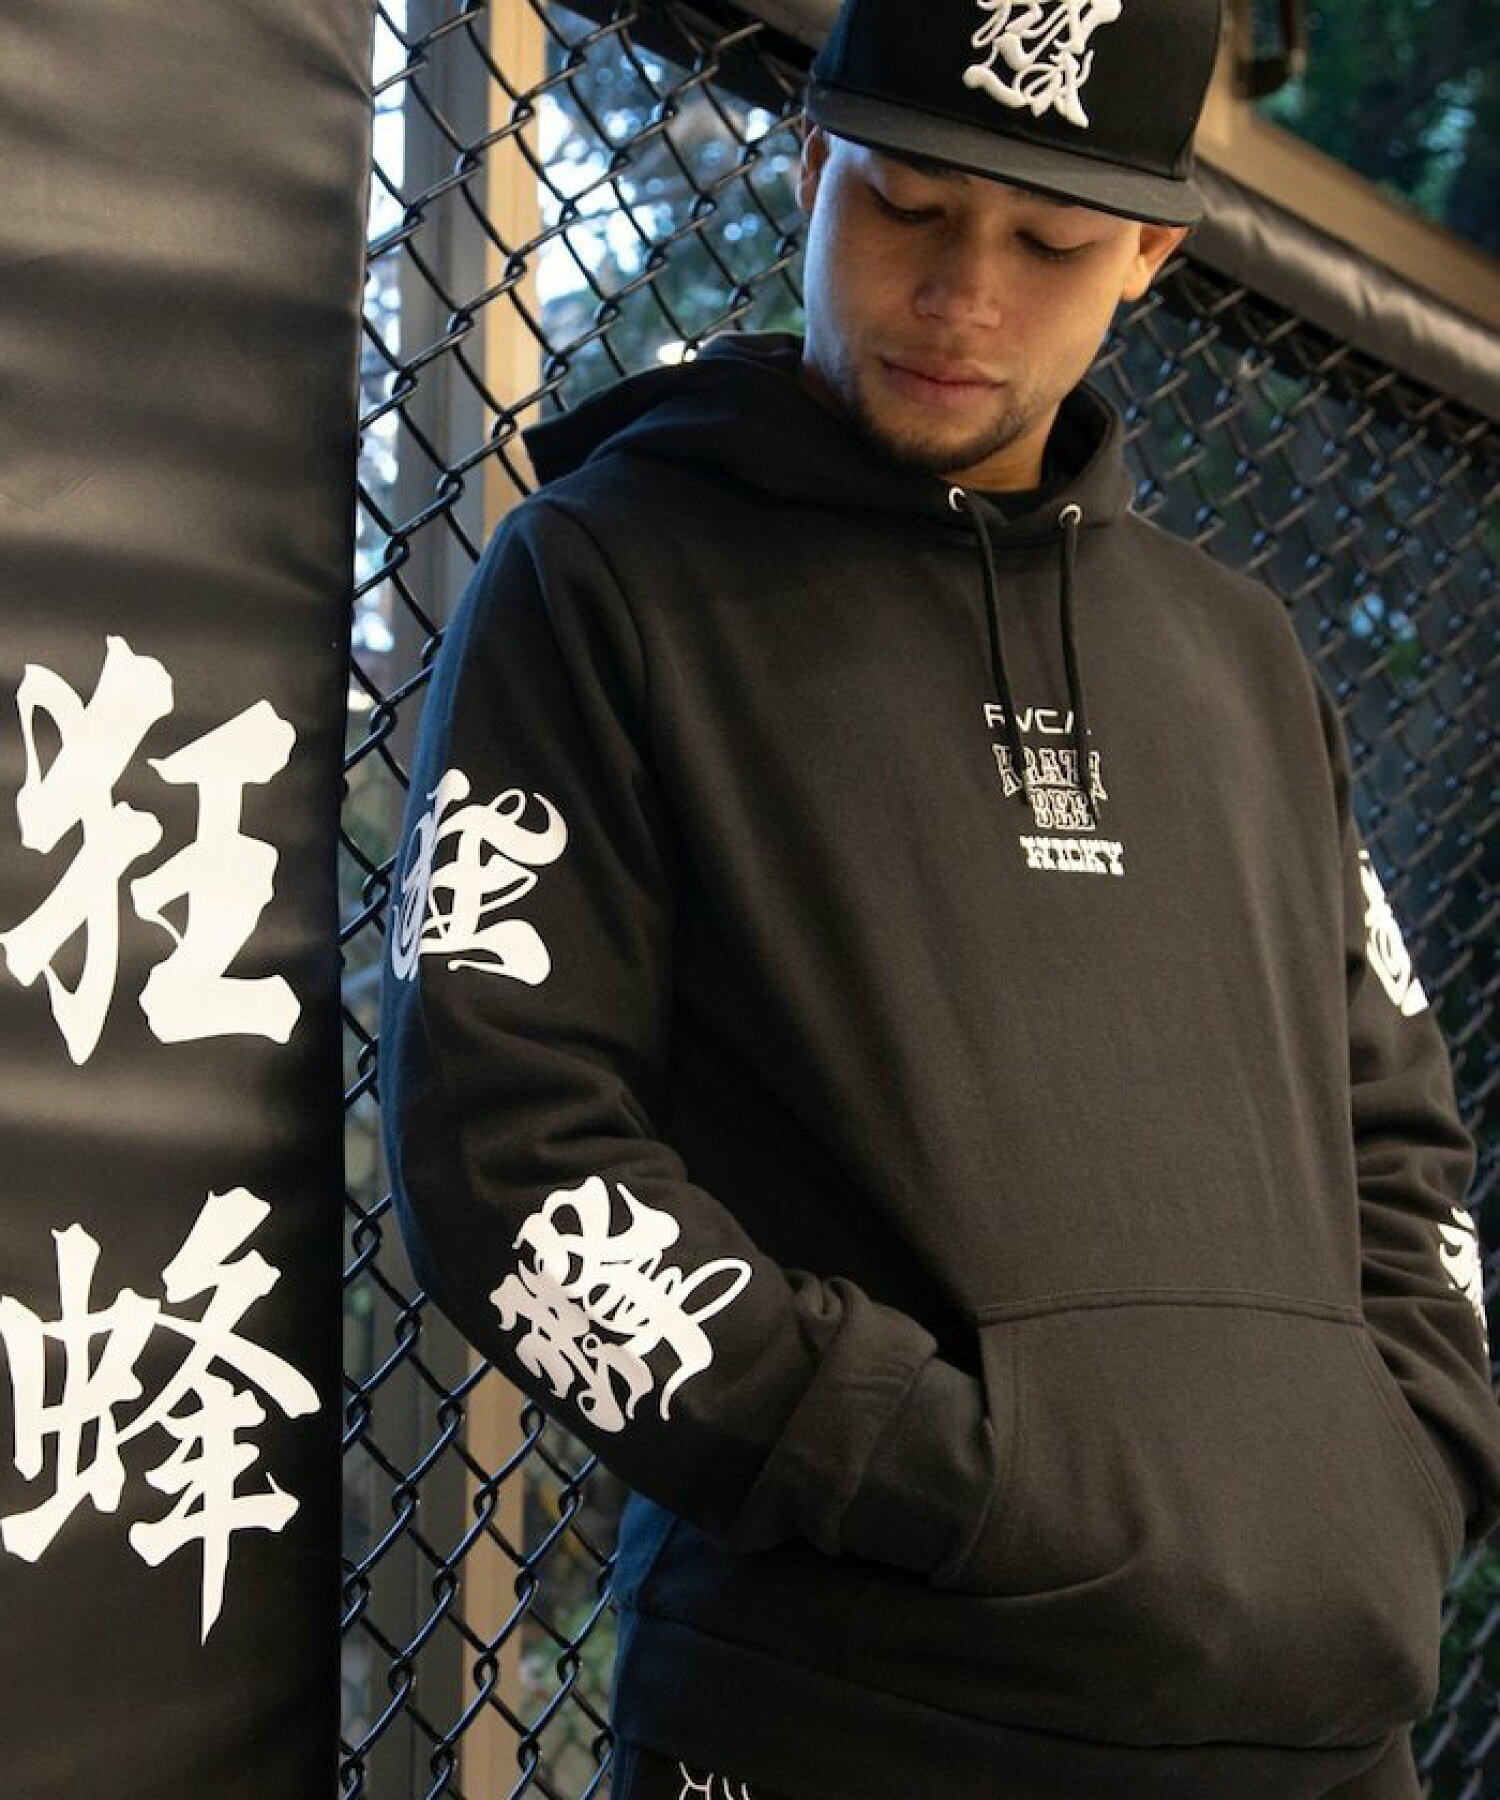 KRAZY BEE HOODIE / クレイジービー フーディ / バックプリント パーカー /  BE041P01 【限定展開】